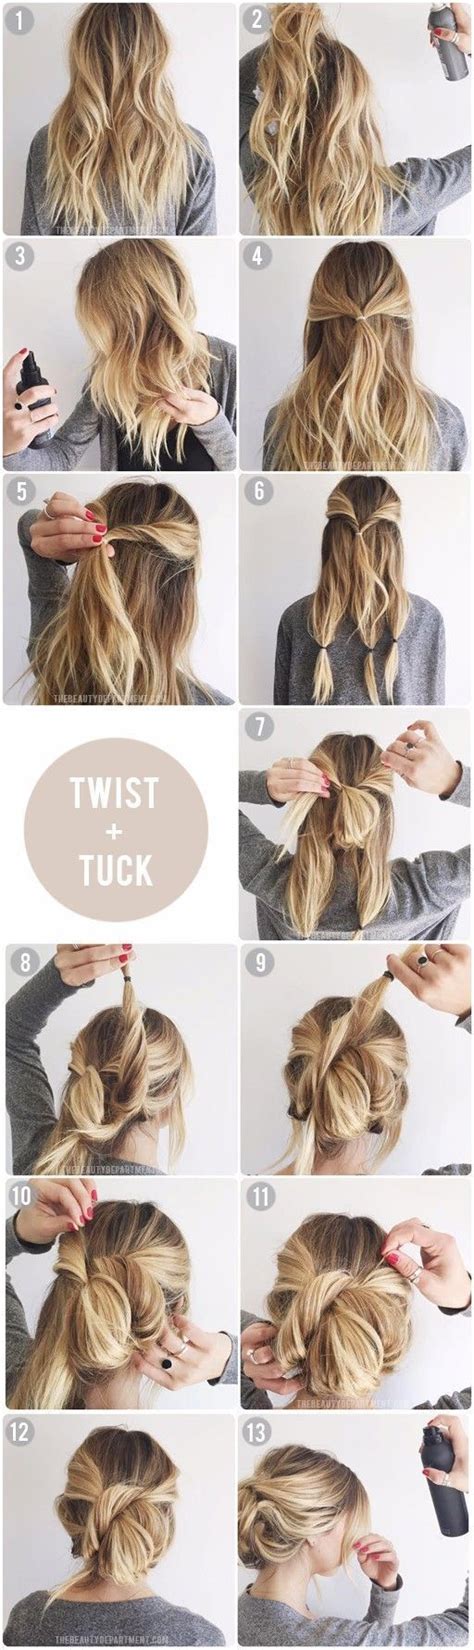 Fresh Cute Ways To Put Your Hair Up For Work Hairstyles Inspiration